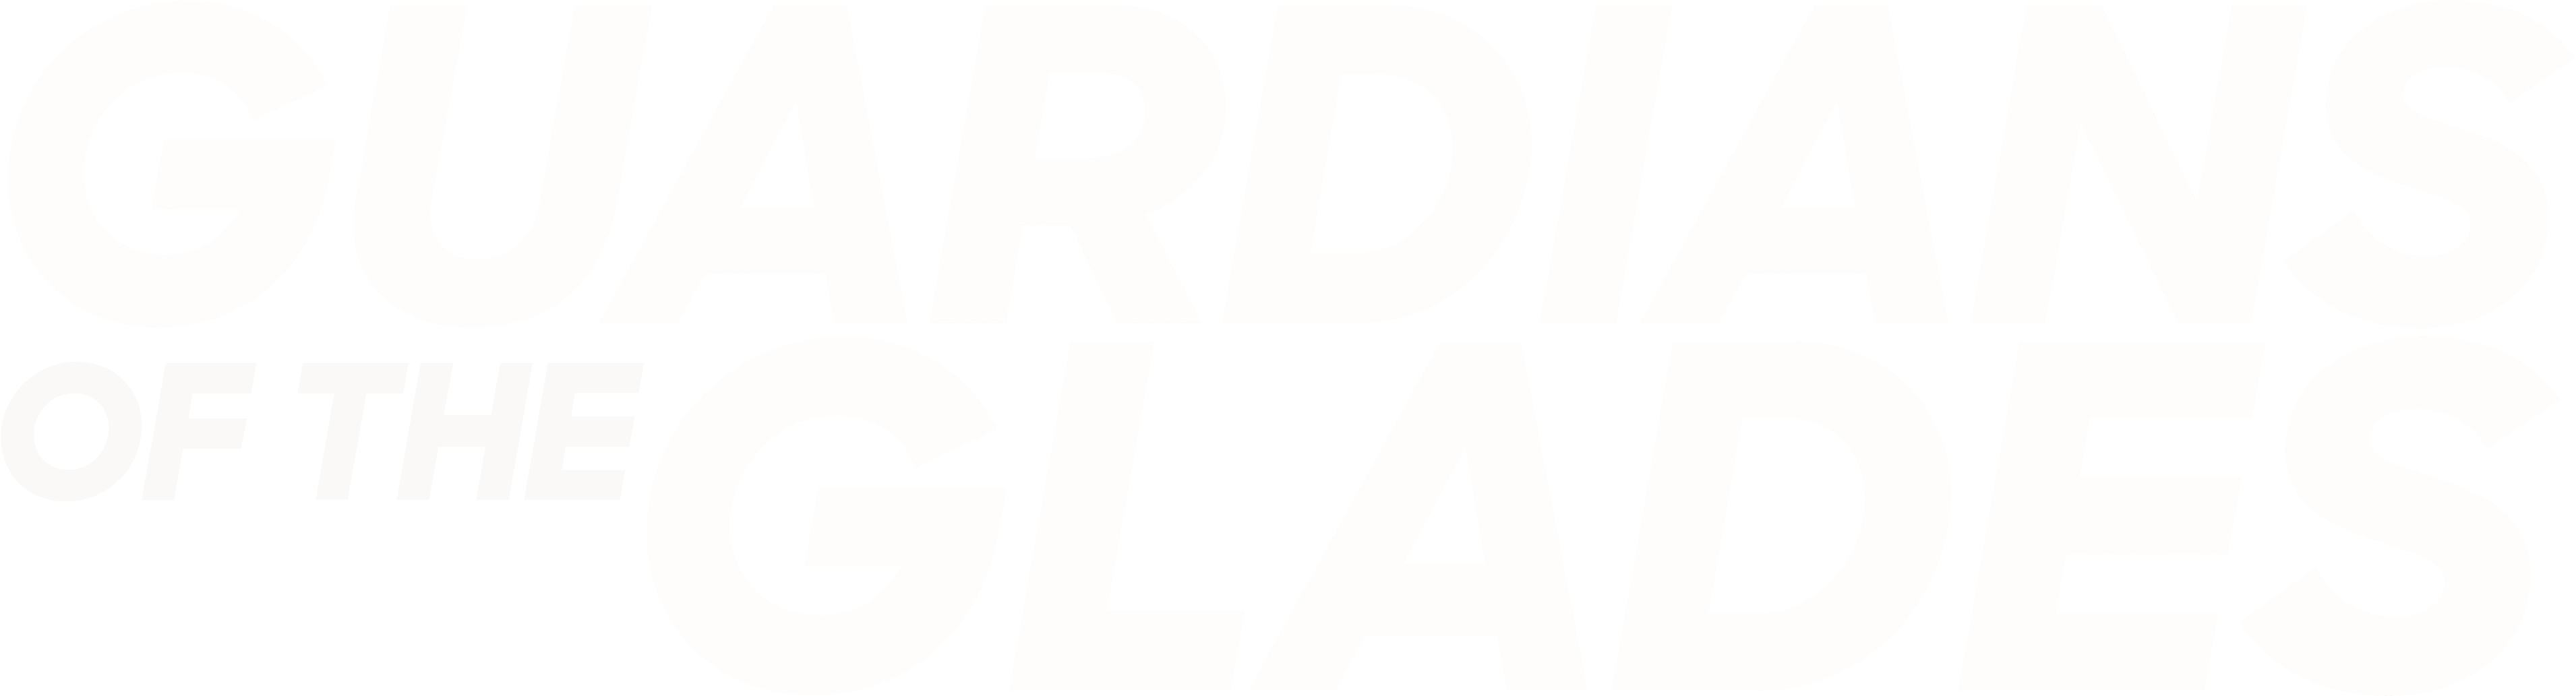 Guardians of the Glades logo